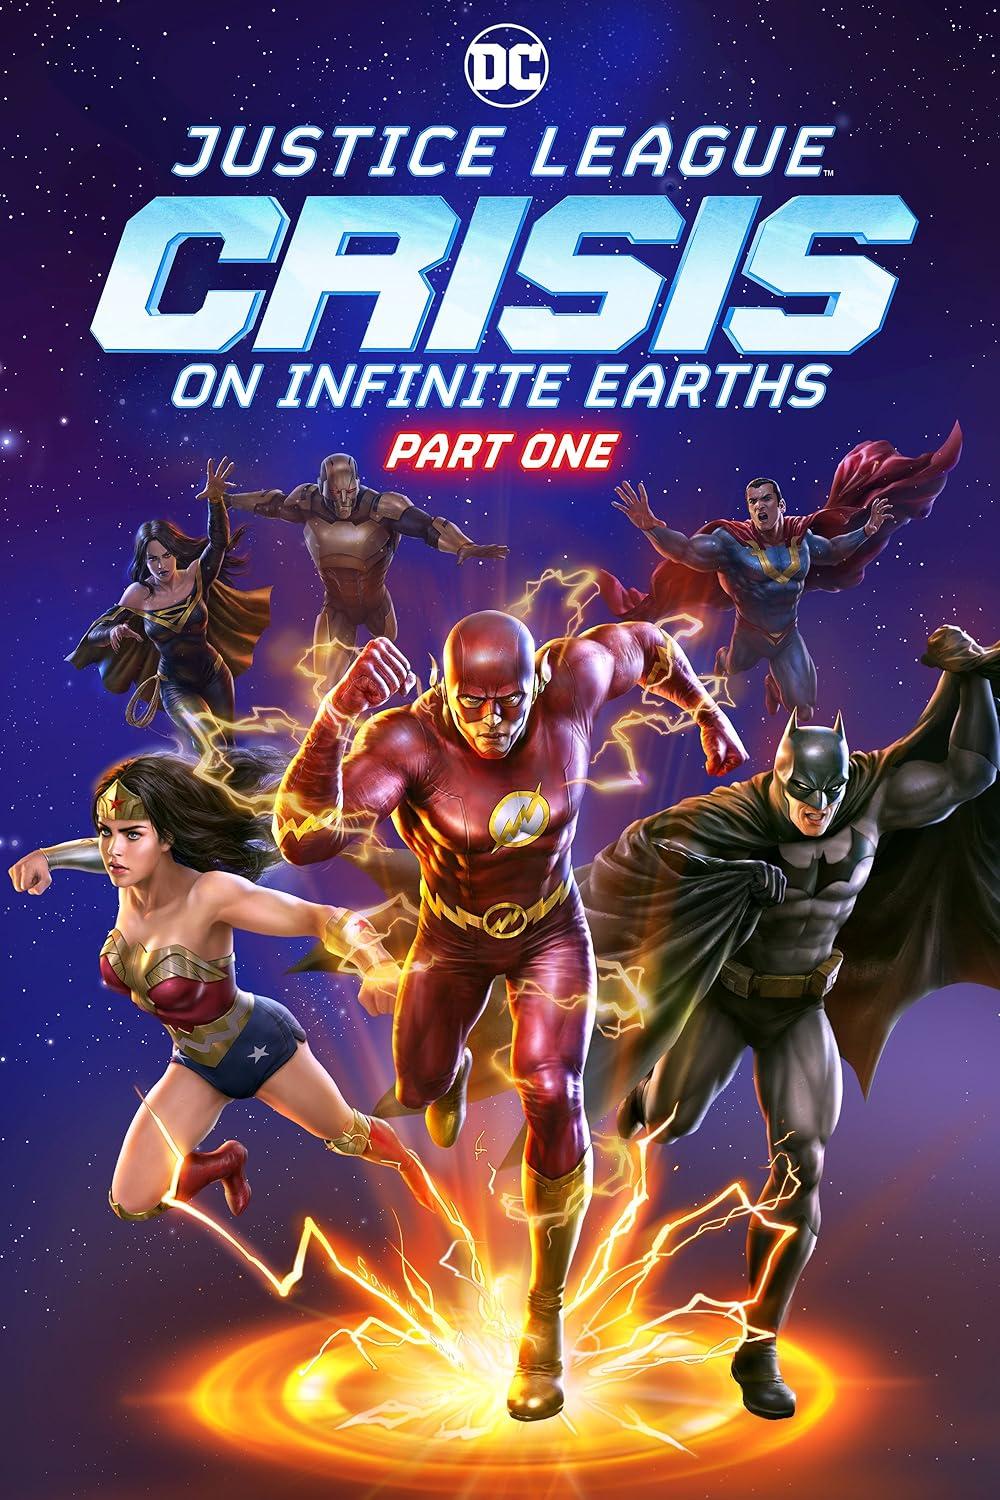 Justice League: Crisis on Infinite Earths - Part 1 (January 9) - Available to buy and rent on BookMyShow Stream
The first part of the animated trilogy, 'Justice League: Crisis on Infinite Earths,' unfolds as a pivotal chapter in the DC Multiverse saga. Inspired by the iconic comic book series, the story follows the unleashing of the malevolent Anti-Monitor across the multiverse, wreaking havoc on diverse Earths. To counter this crisis, the Monitor assembles a formidable alliance of superheroes, including Superman, Batman, Wonder Woman, Flash, and Green Lantern. Their mission: to thwart the impending catastrophe.
 